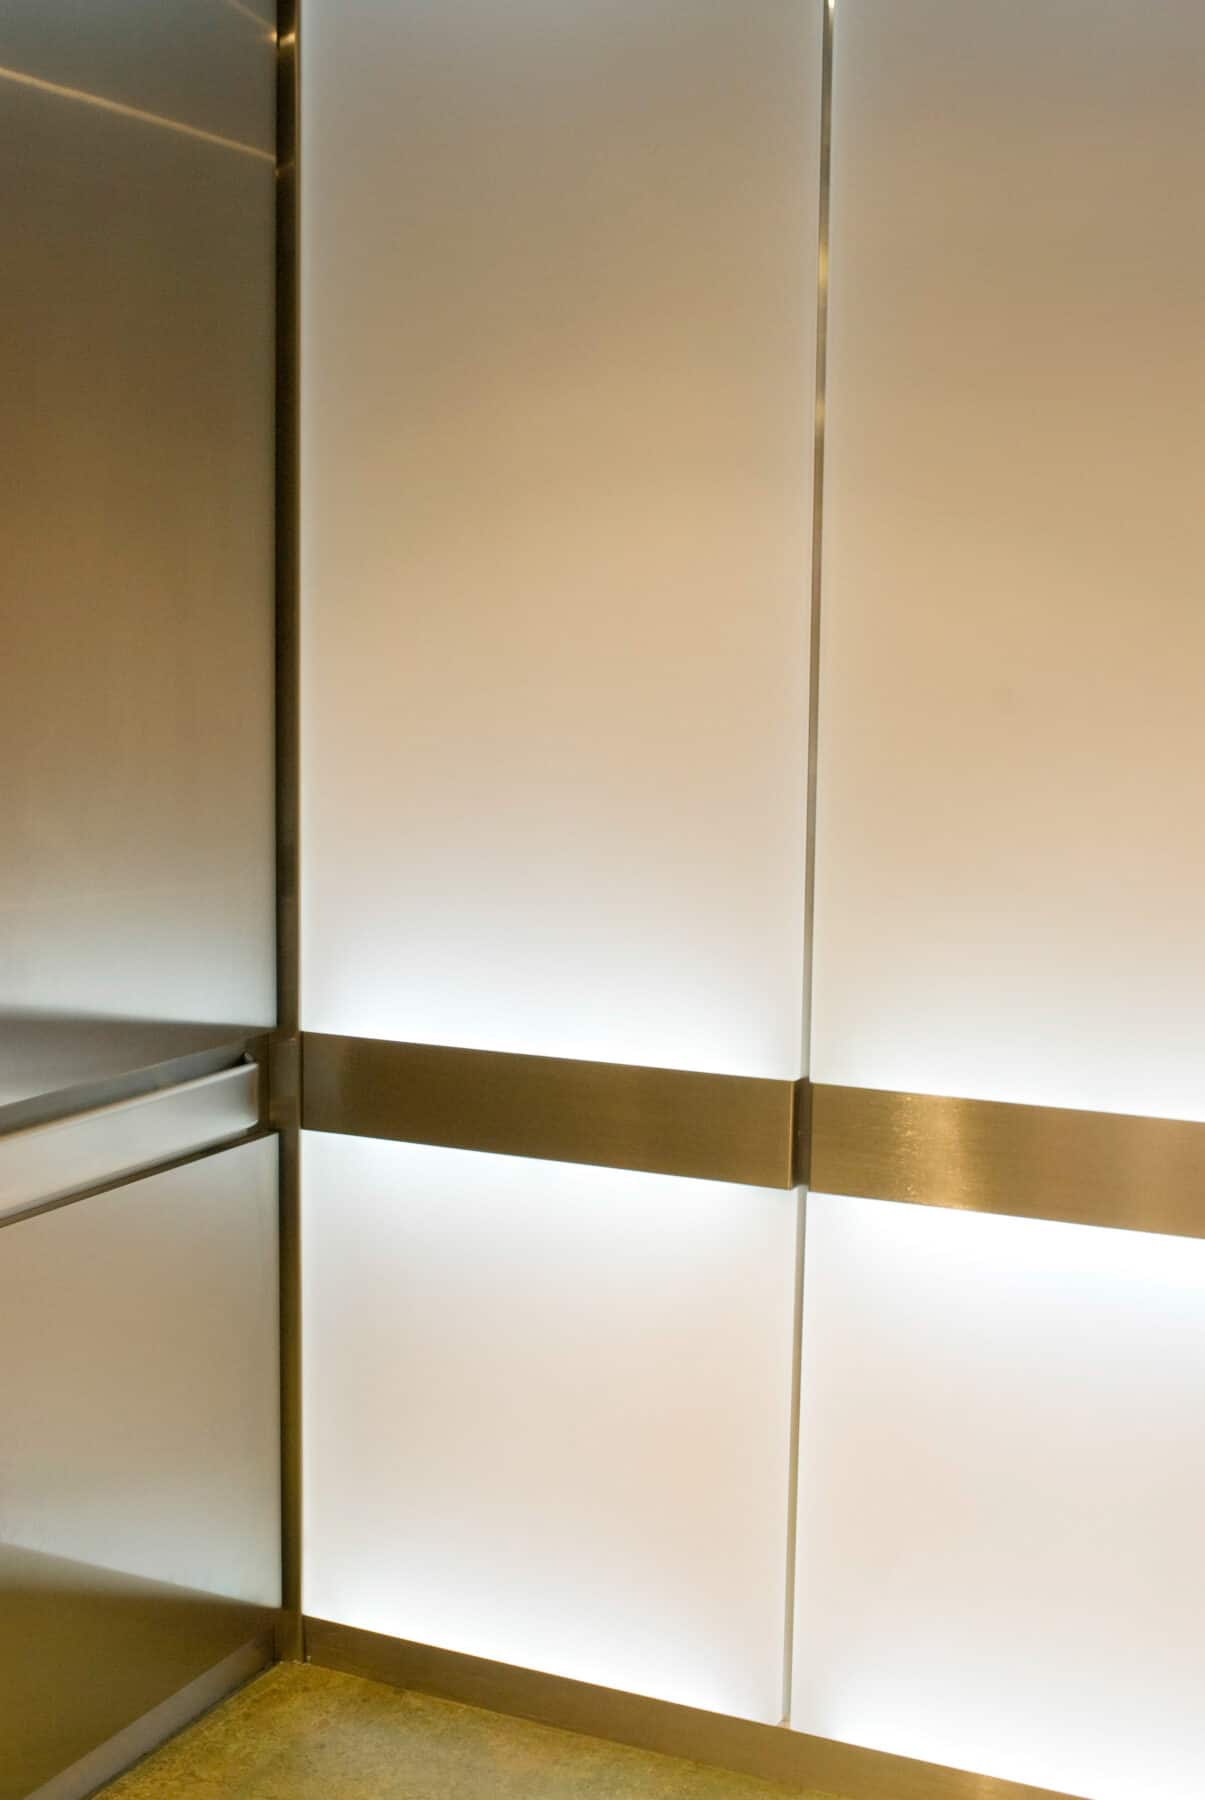 Custom Elevators with Back lit Glass and Polished Metal Handrails for West Jackson Lobby Remodel by Commercial Builder & General Contractor Structural Enterprises